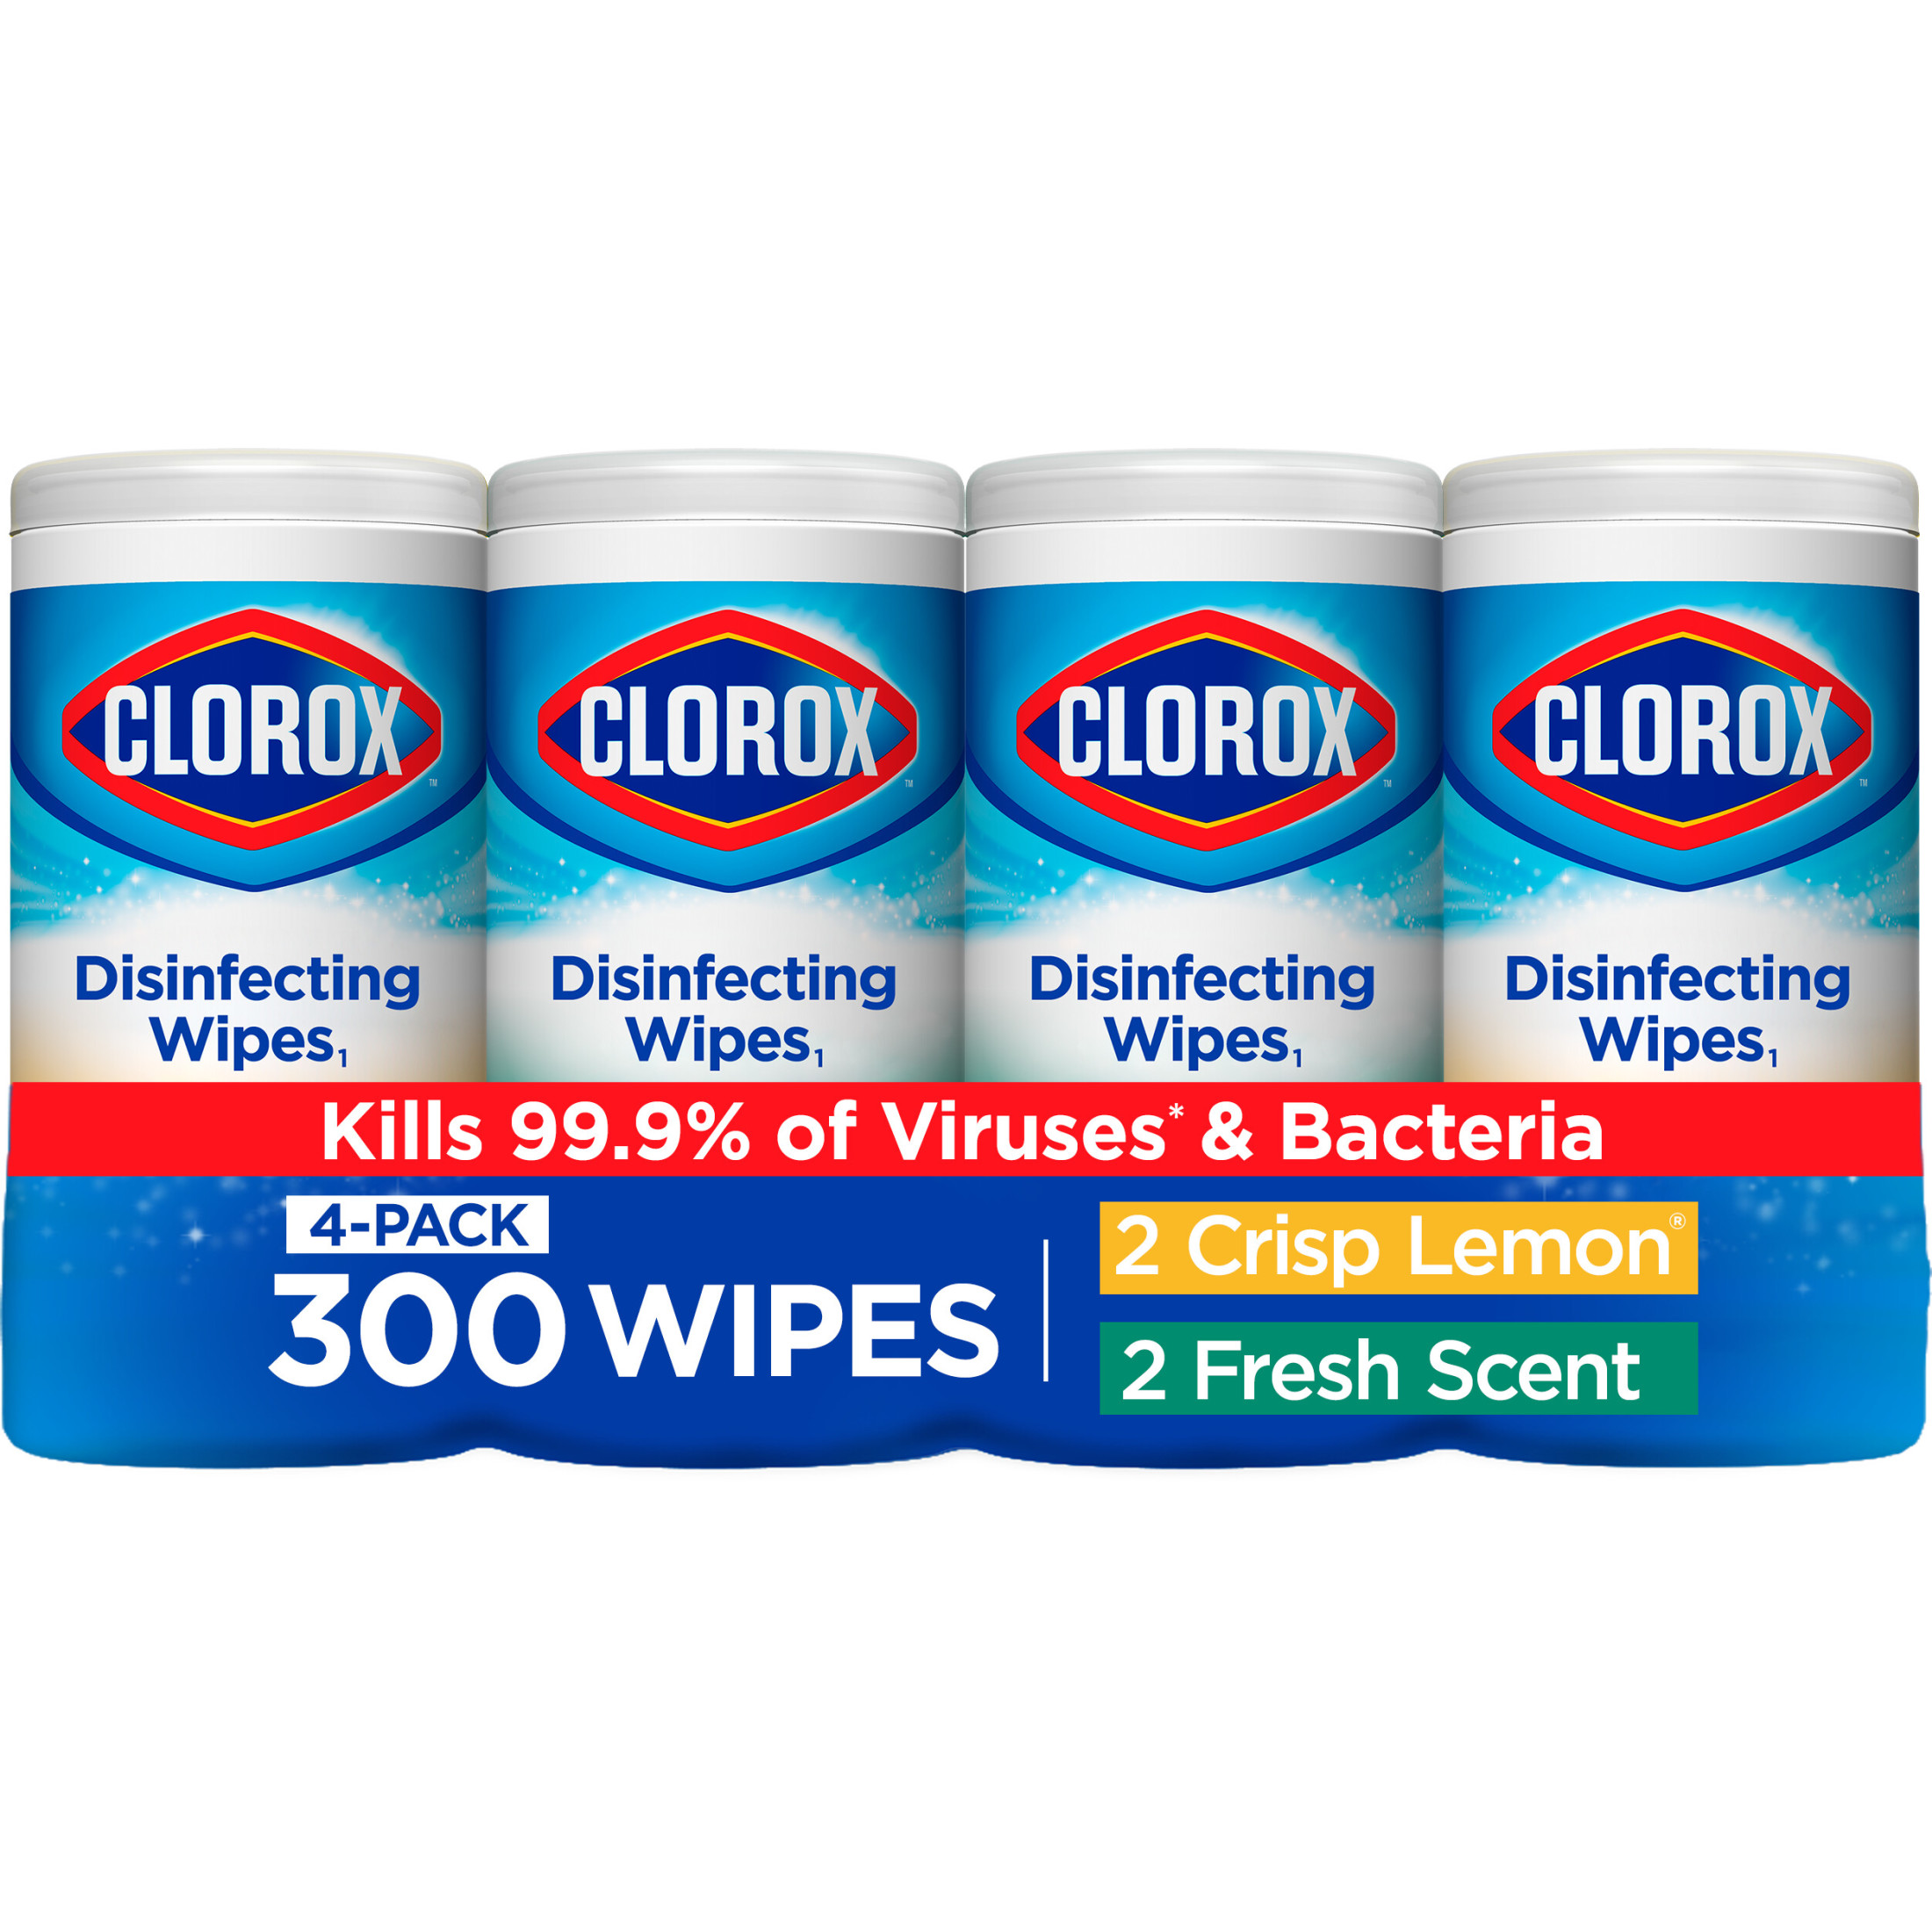 Clorox Disinfecting Wipes (300 Count Value Pack), Bleach Free Cleaning Wipes - 4 Pack - 75 Count Each - image 1 of 10